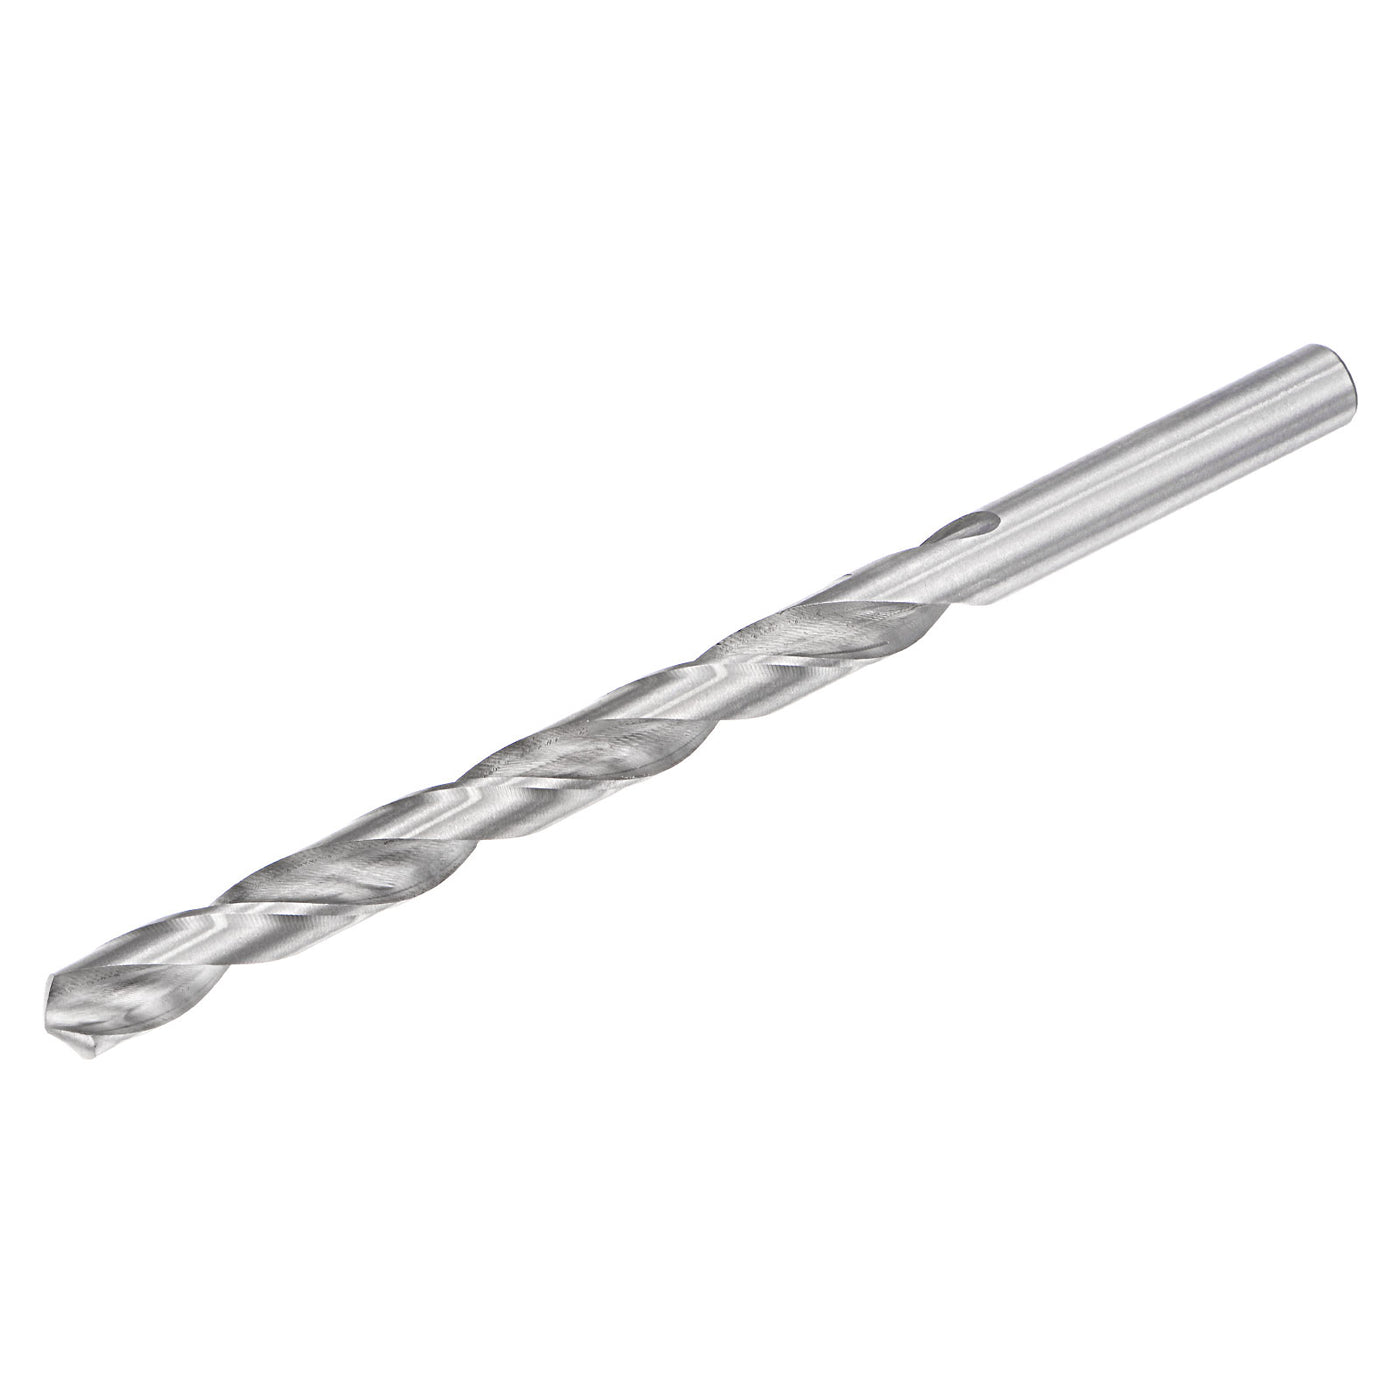 uxcell Uxcell 15mm Twist Drill Bits, High-Speed Steel Extra Long Drill Bit 250mm Length